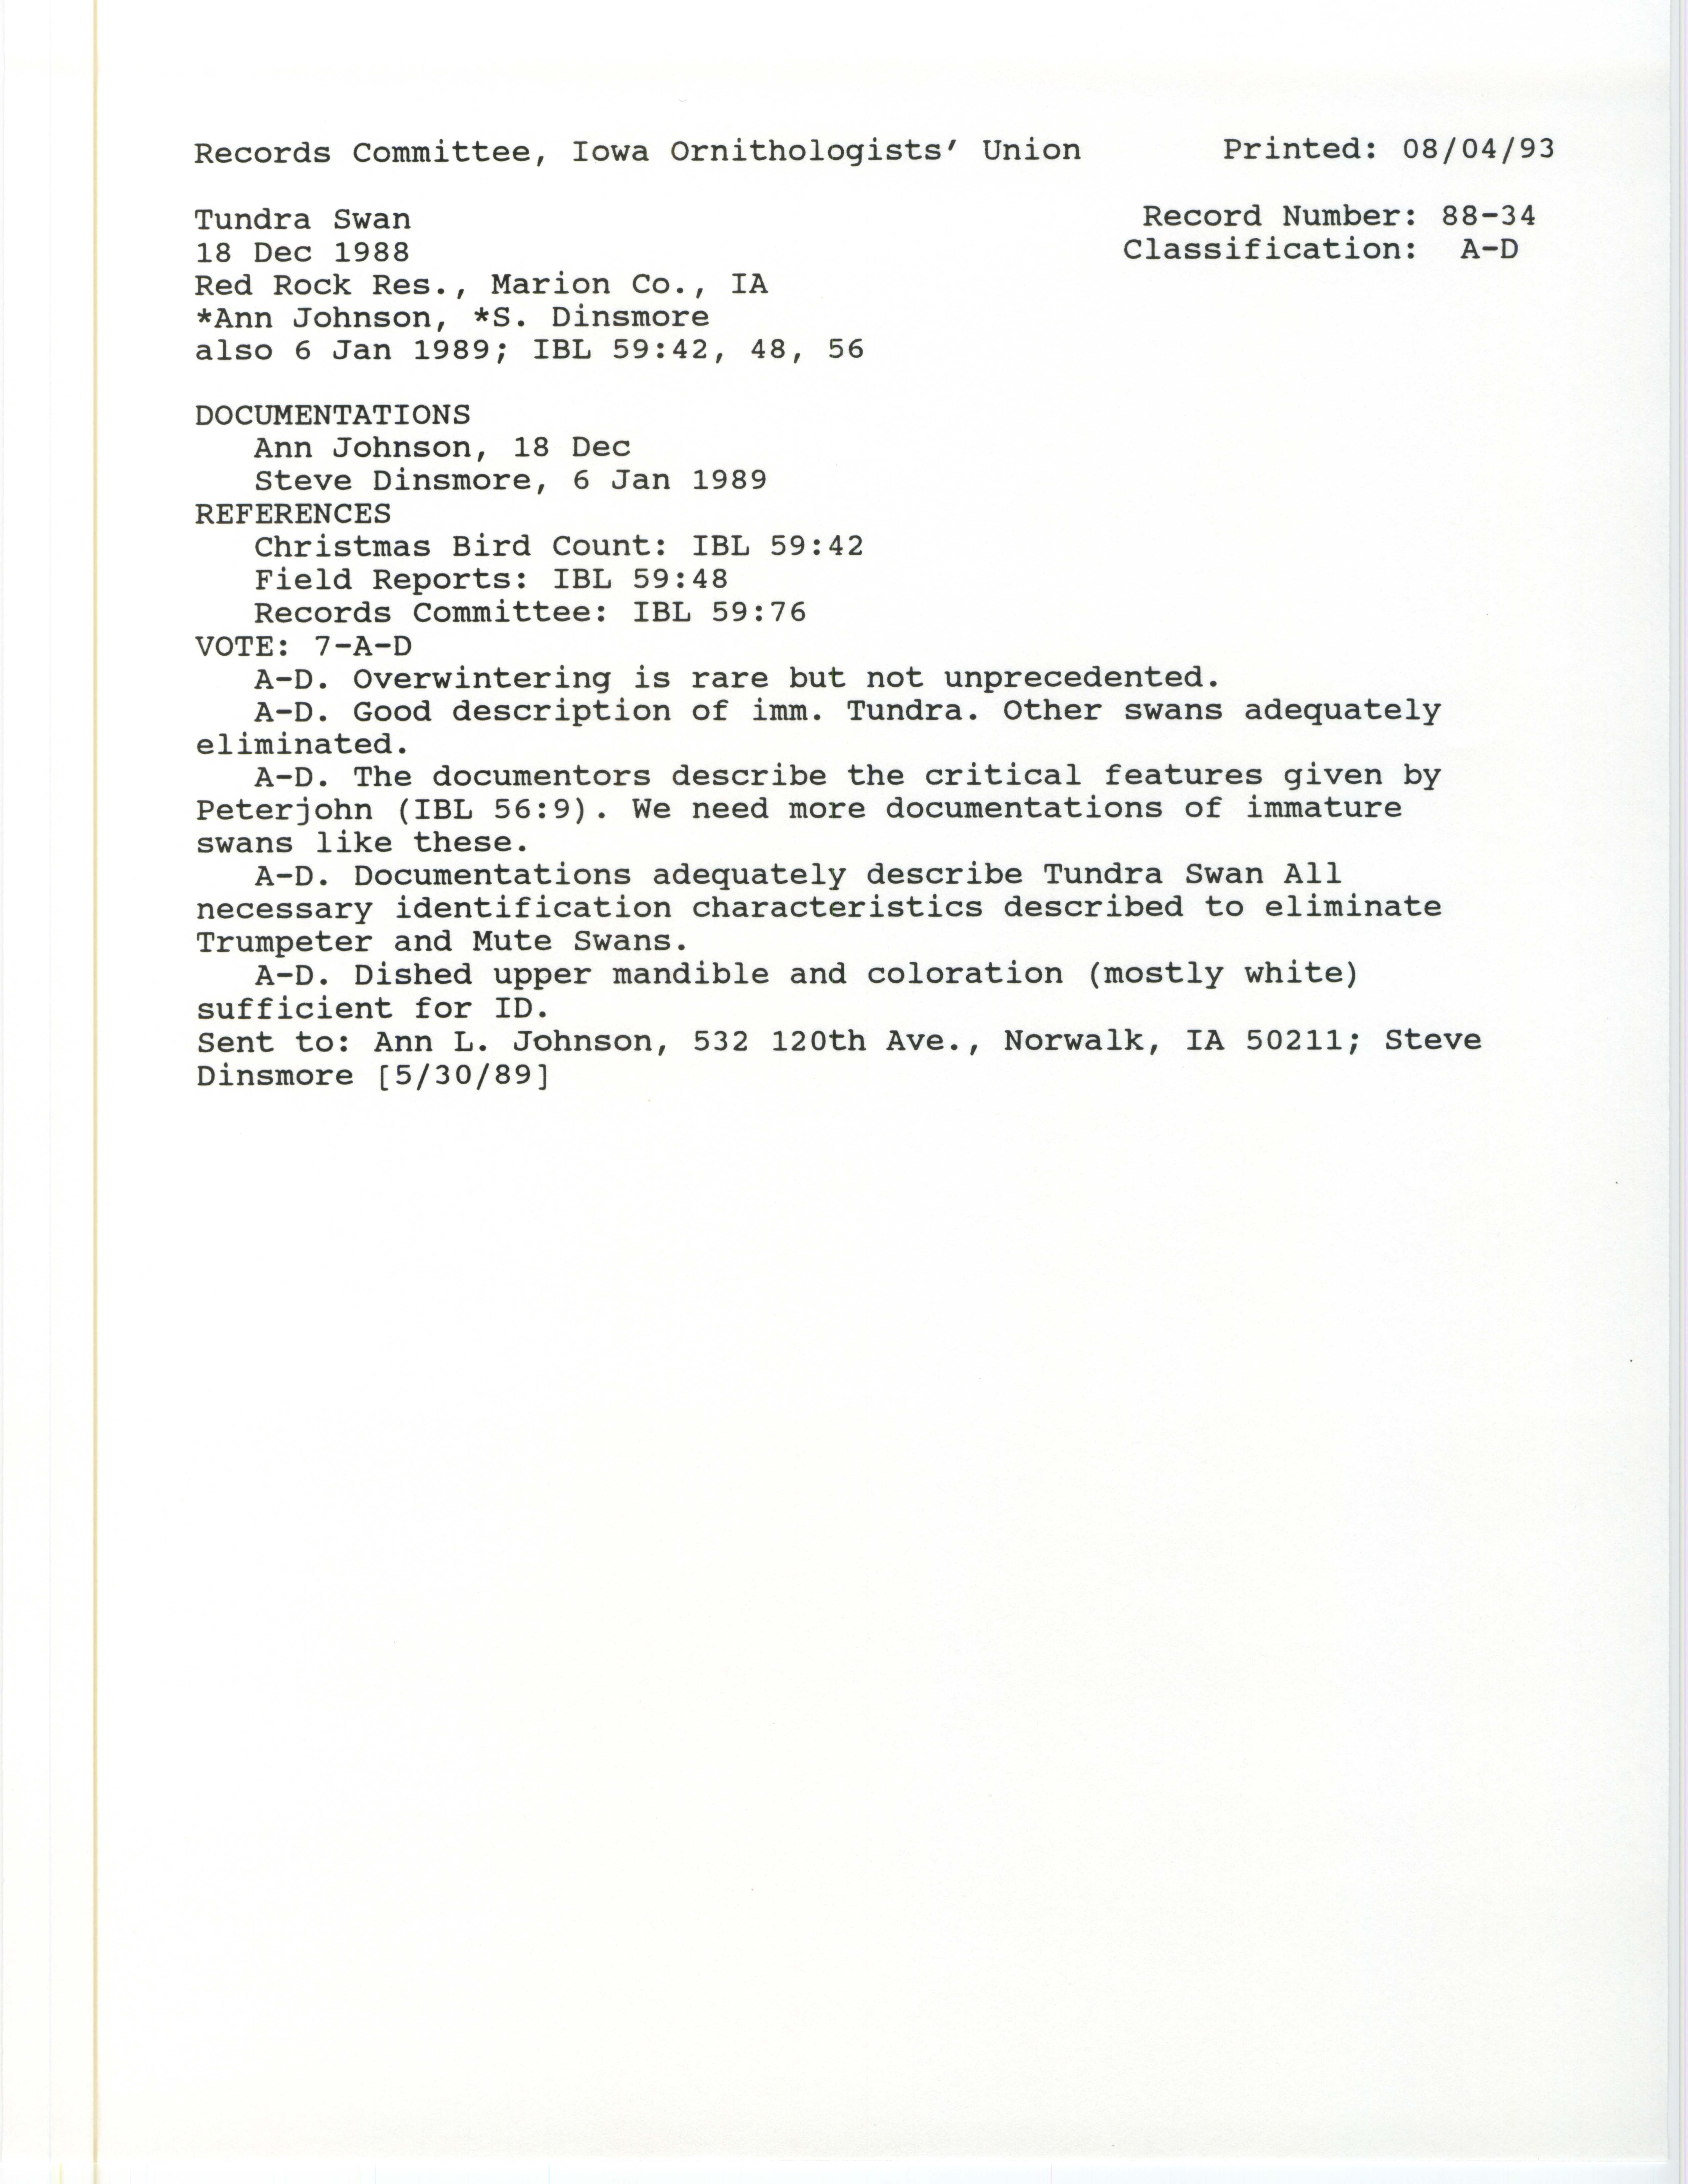 Records Committee review for rare bird sighting of Tundra Swan at Red Rock Reservoir, 1988